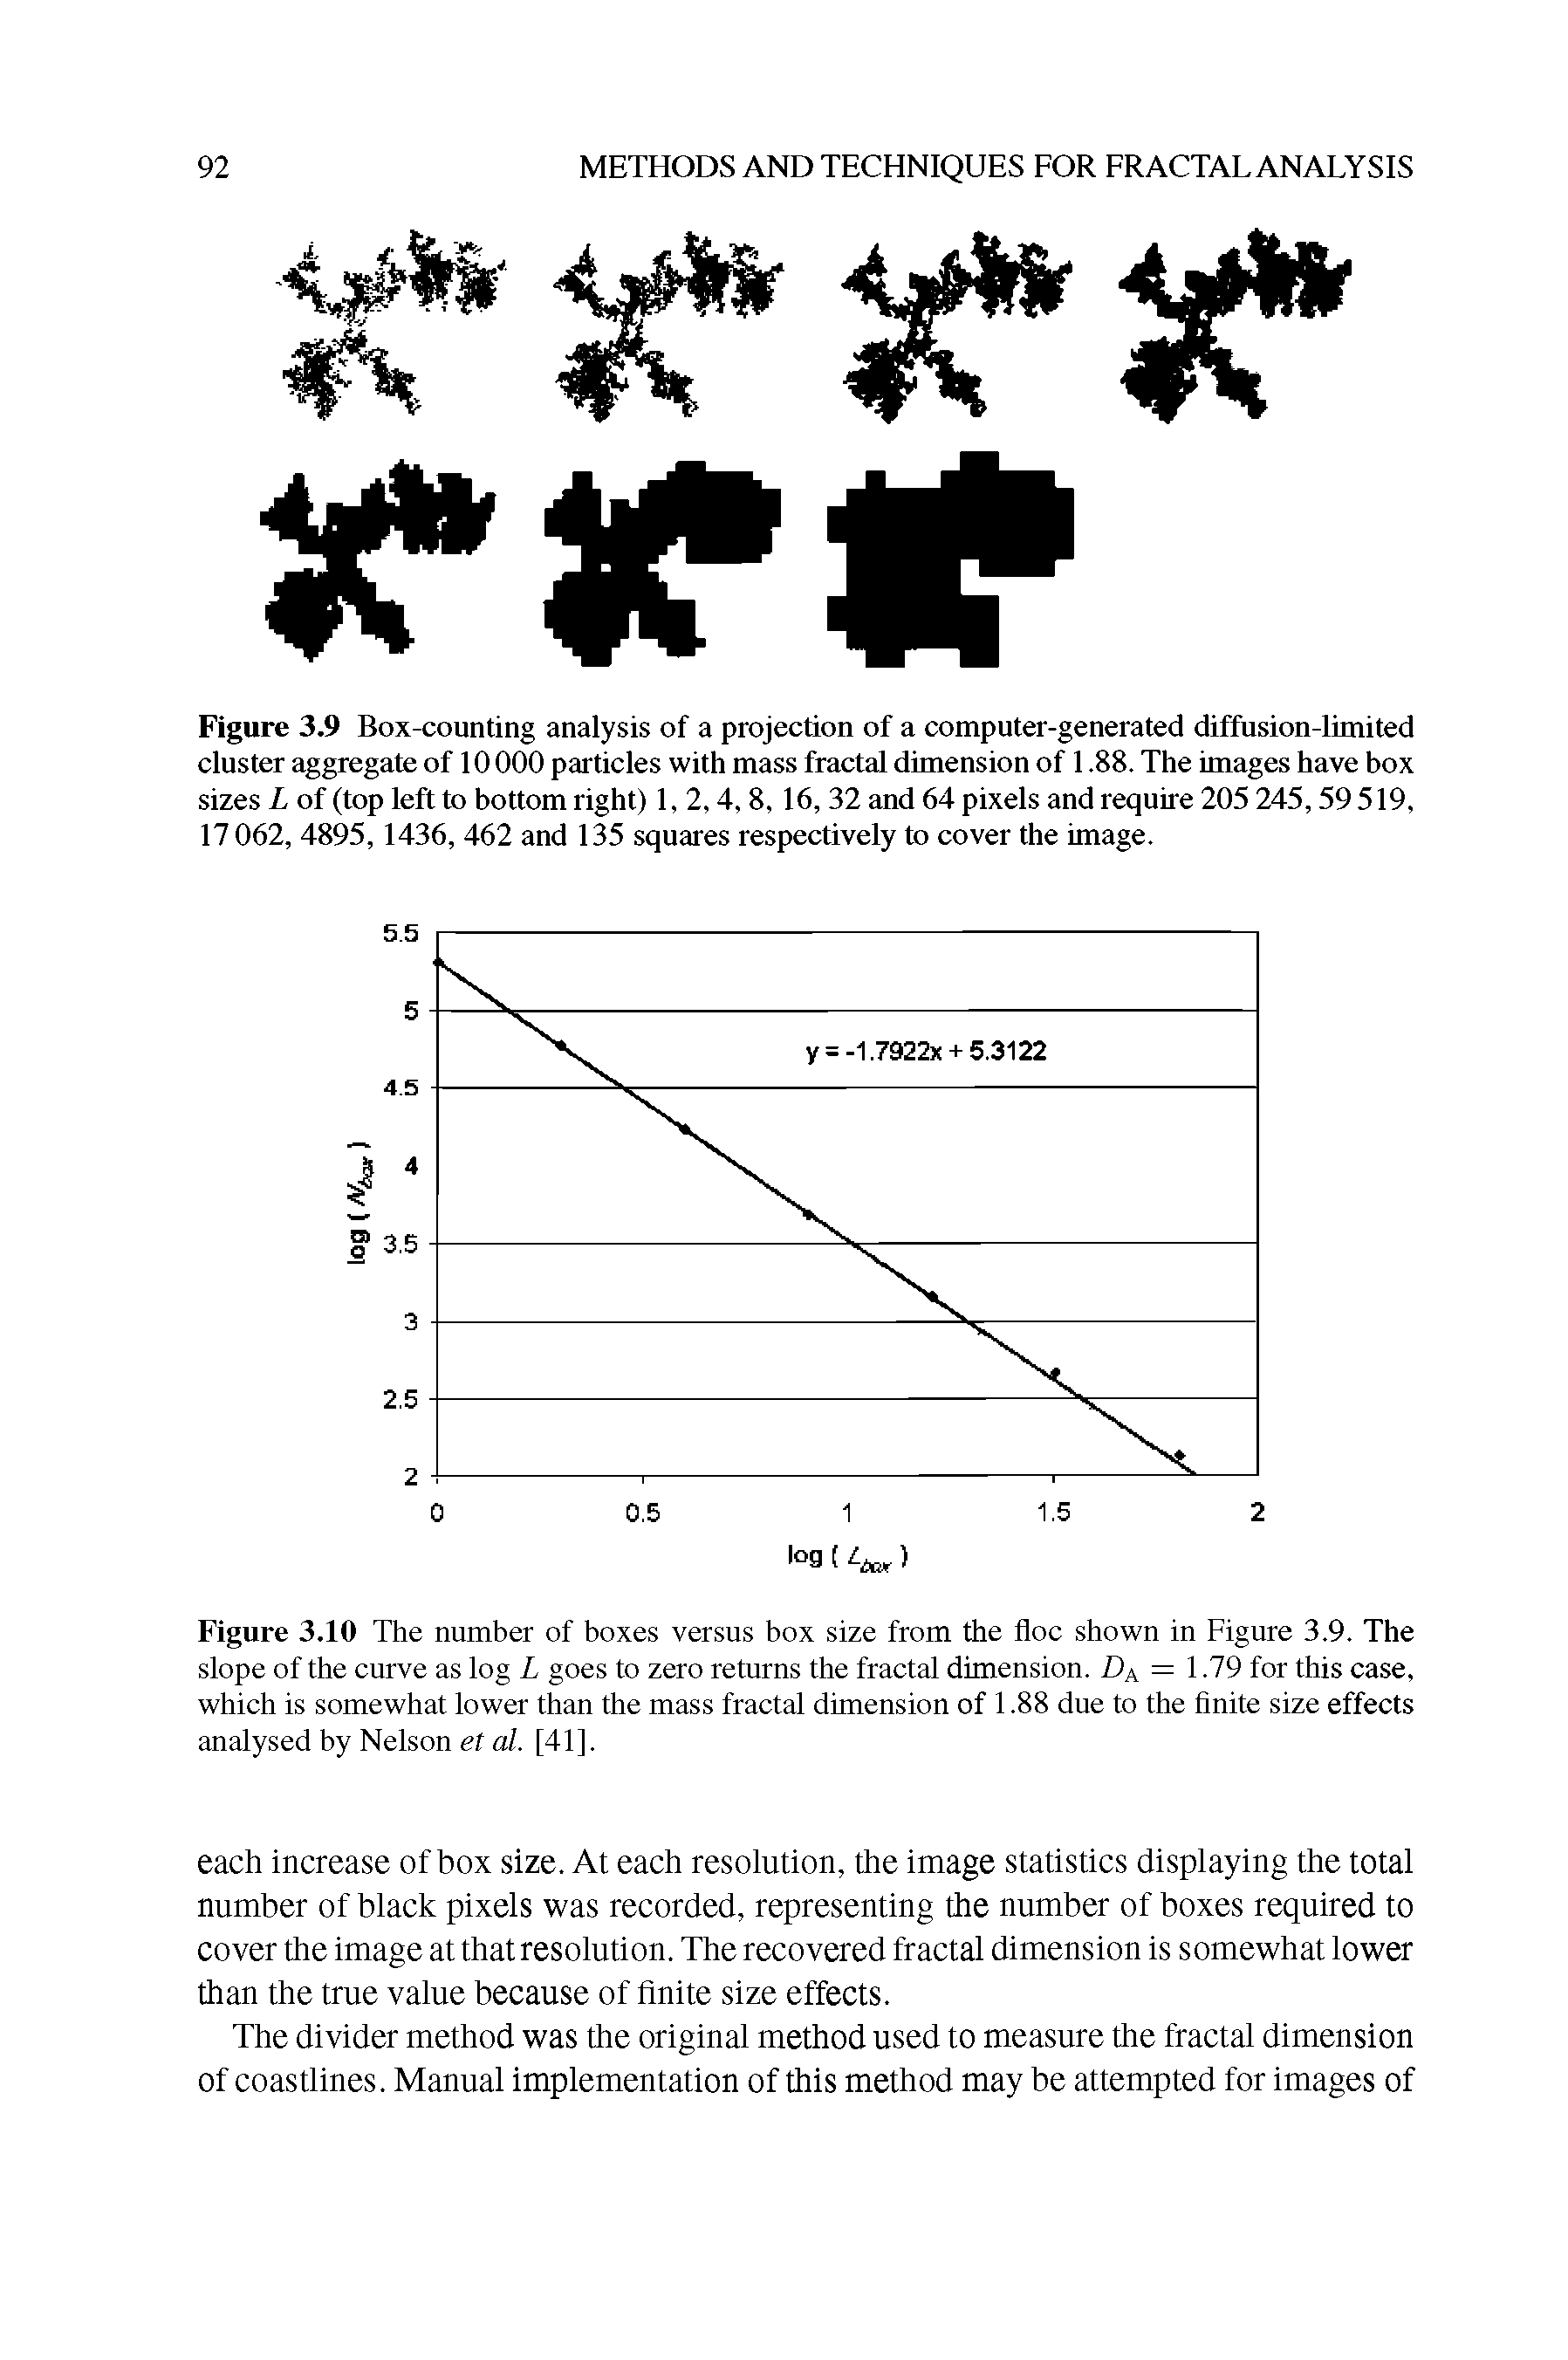 Figure 3.10 The number of boxes versus box size from the floe shown in Figure 3.9. The slope of the curve as log L goes to zero returns the fractal dimension. Da = 1.79 for this case, which is somewhat lower than the mass fractal dimension of 1.88 due to the finite size effects analysed by Nelson et al. [41].